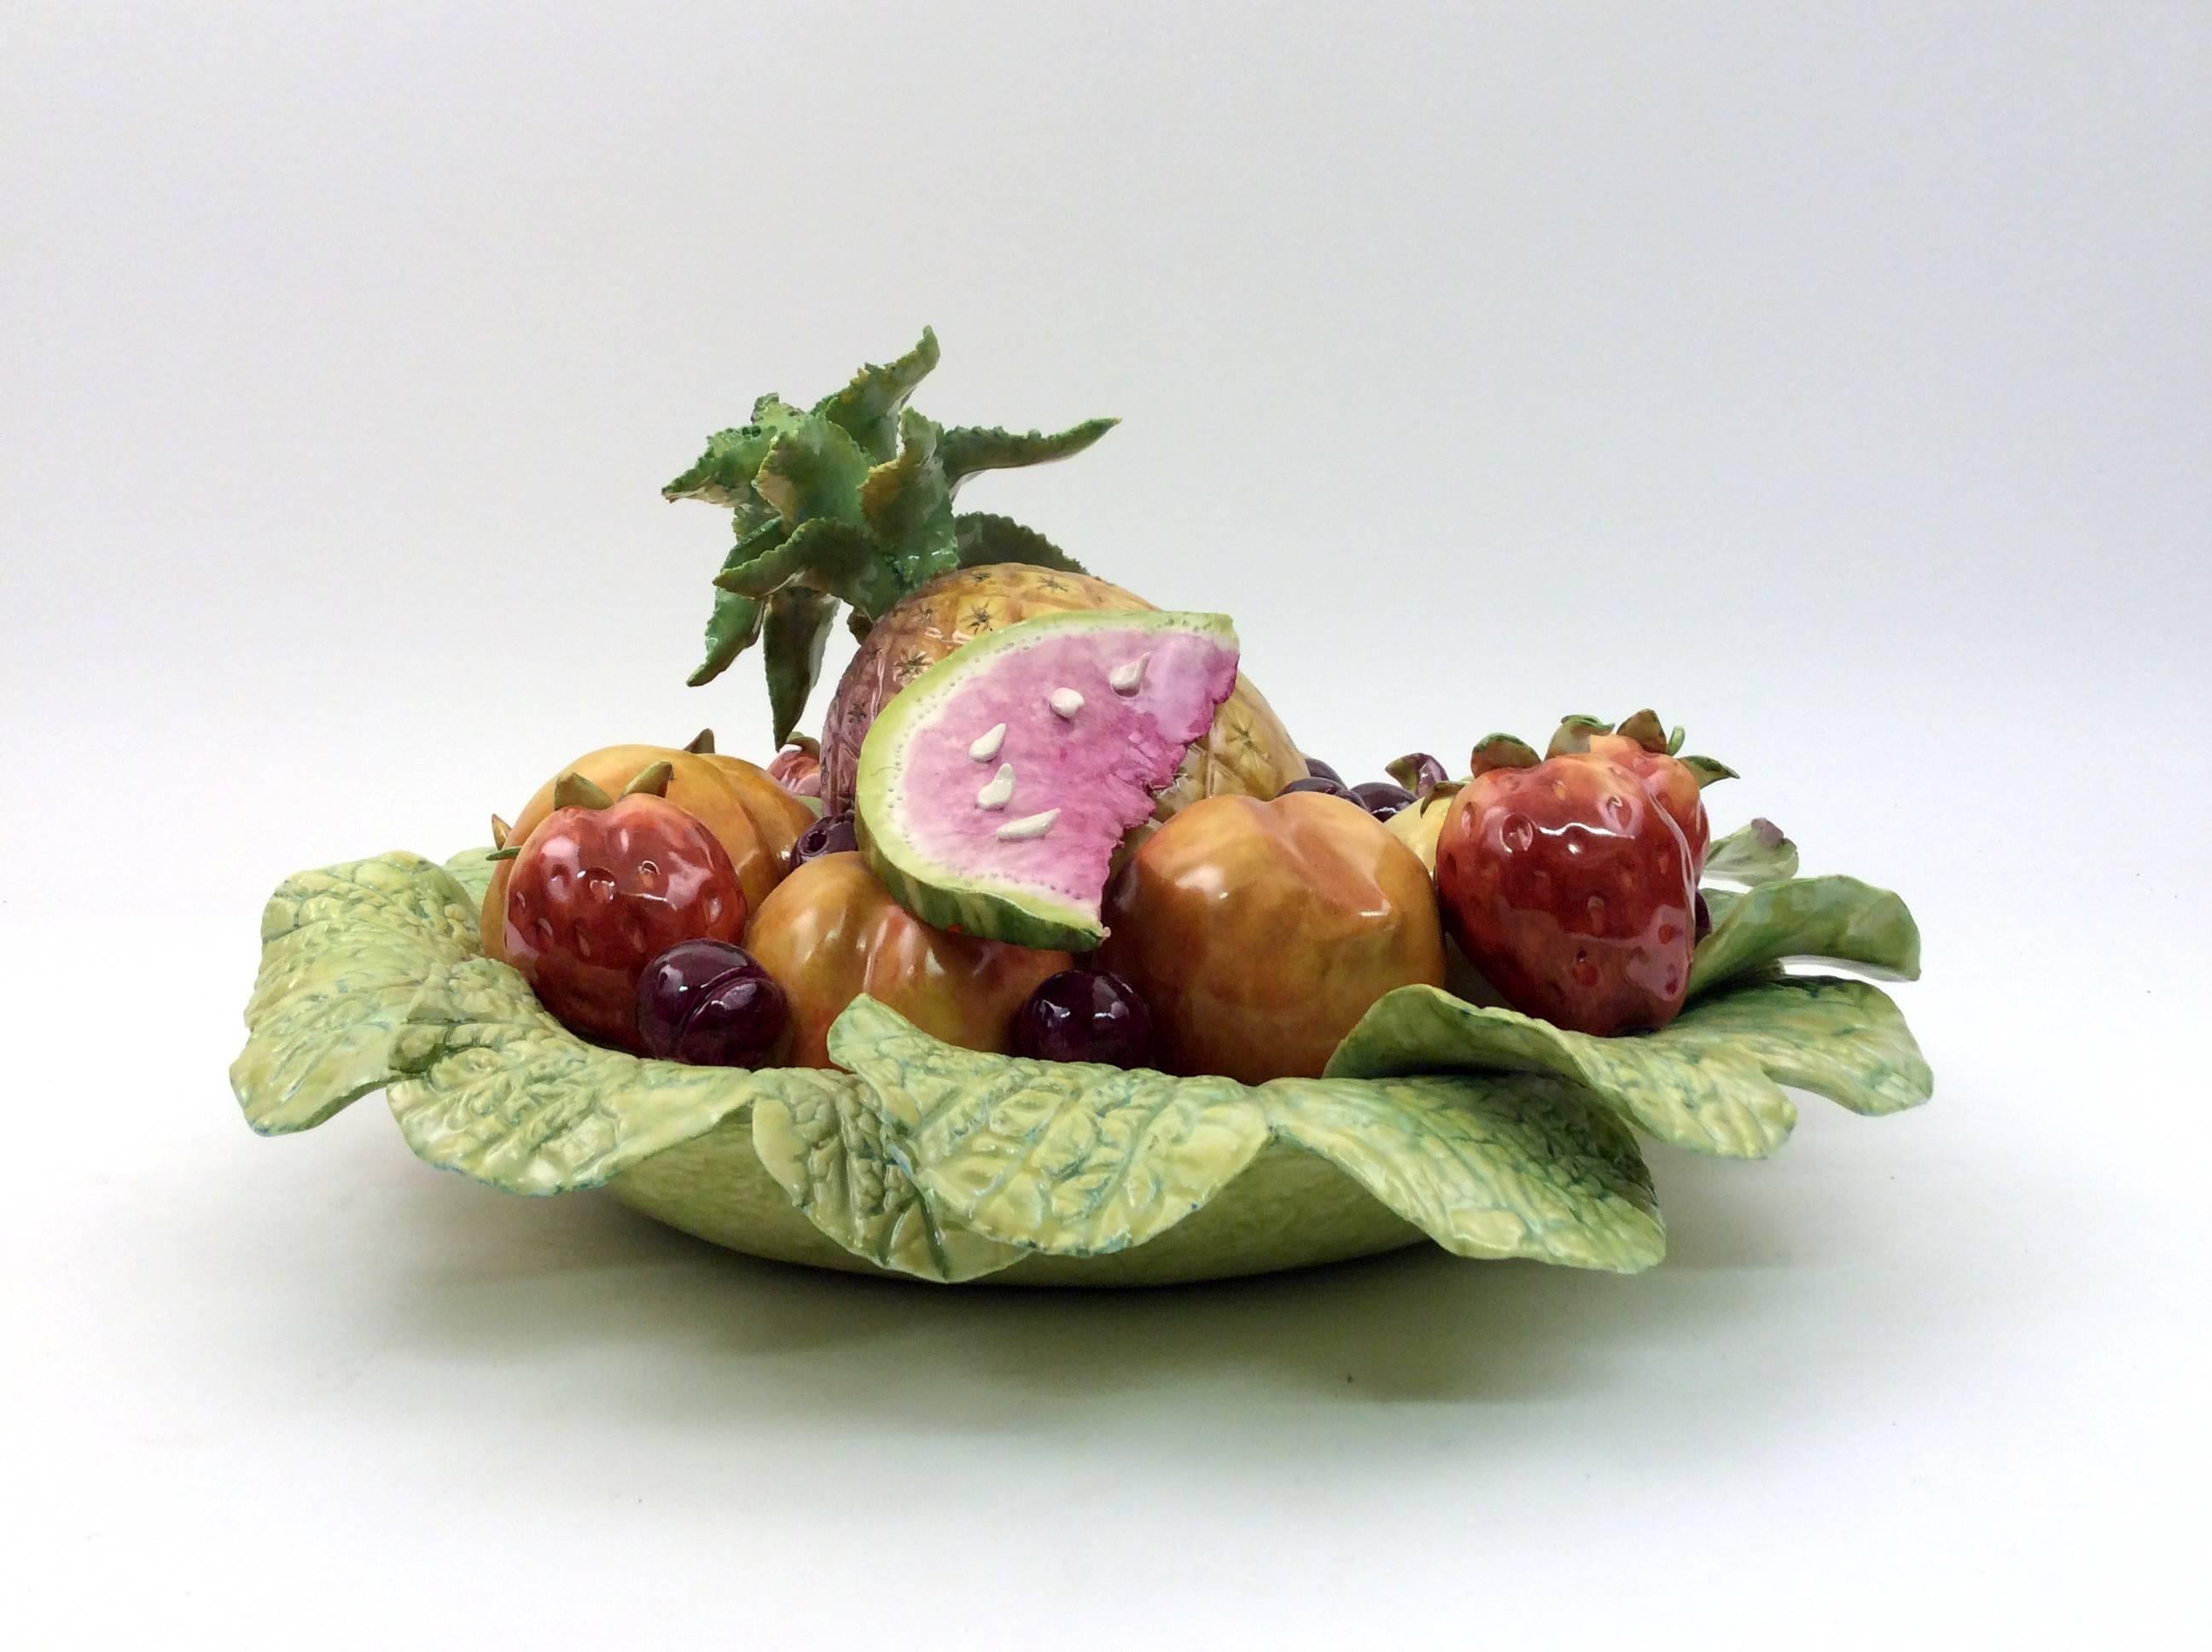 This centerpiece features a cabbage leaf bowl holding richly colored peaches, cherries, strawberries, figs and lemons topped with thinly sliced watermelon and a petite pineapple. This is a one of a kind hand crafted piece.
Katherine Houston is a